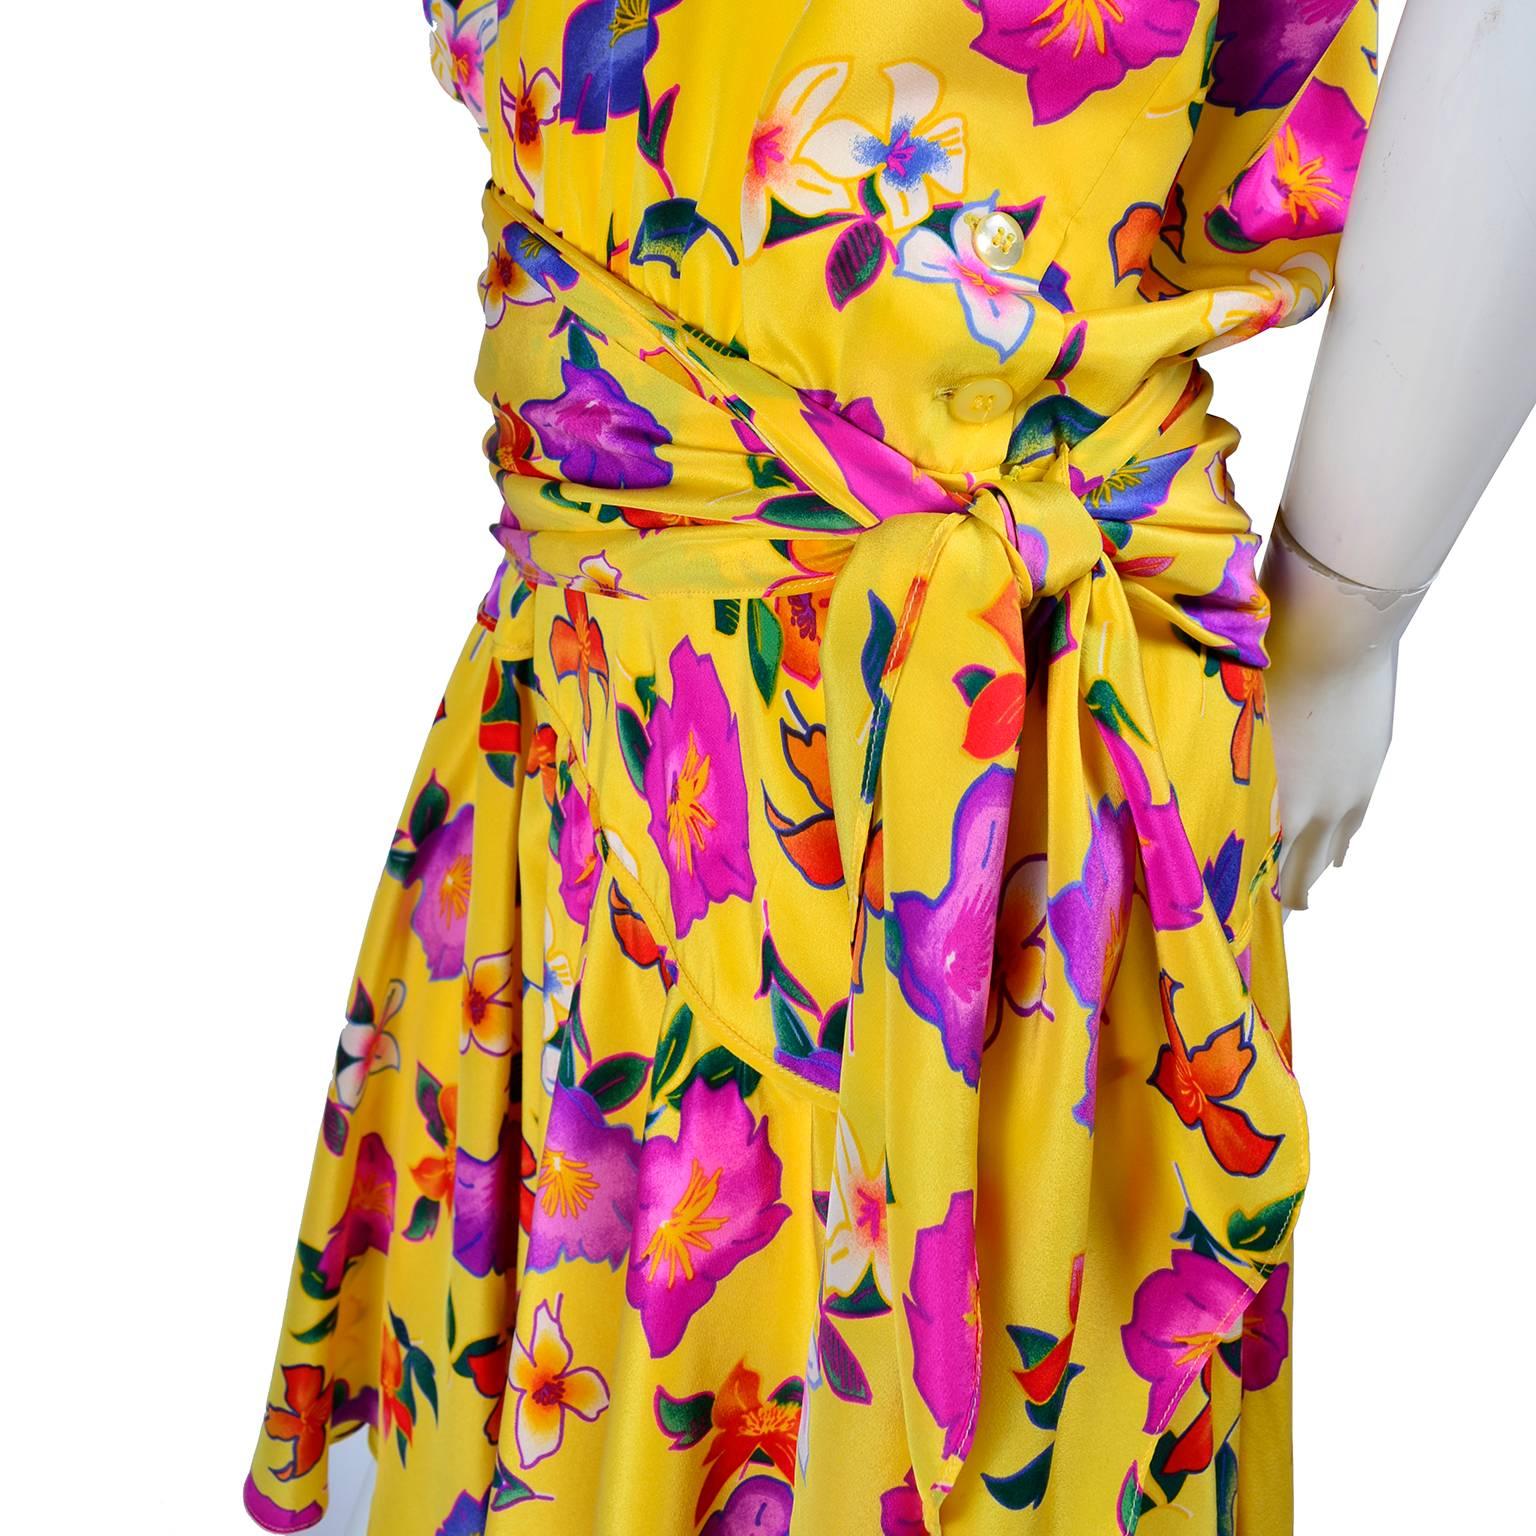 Vintage Escada Dress in a Yellow Floral Silk Print by Margaretha Ley Size 8/10 For Sale 1